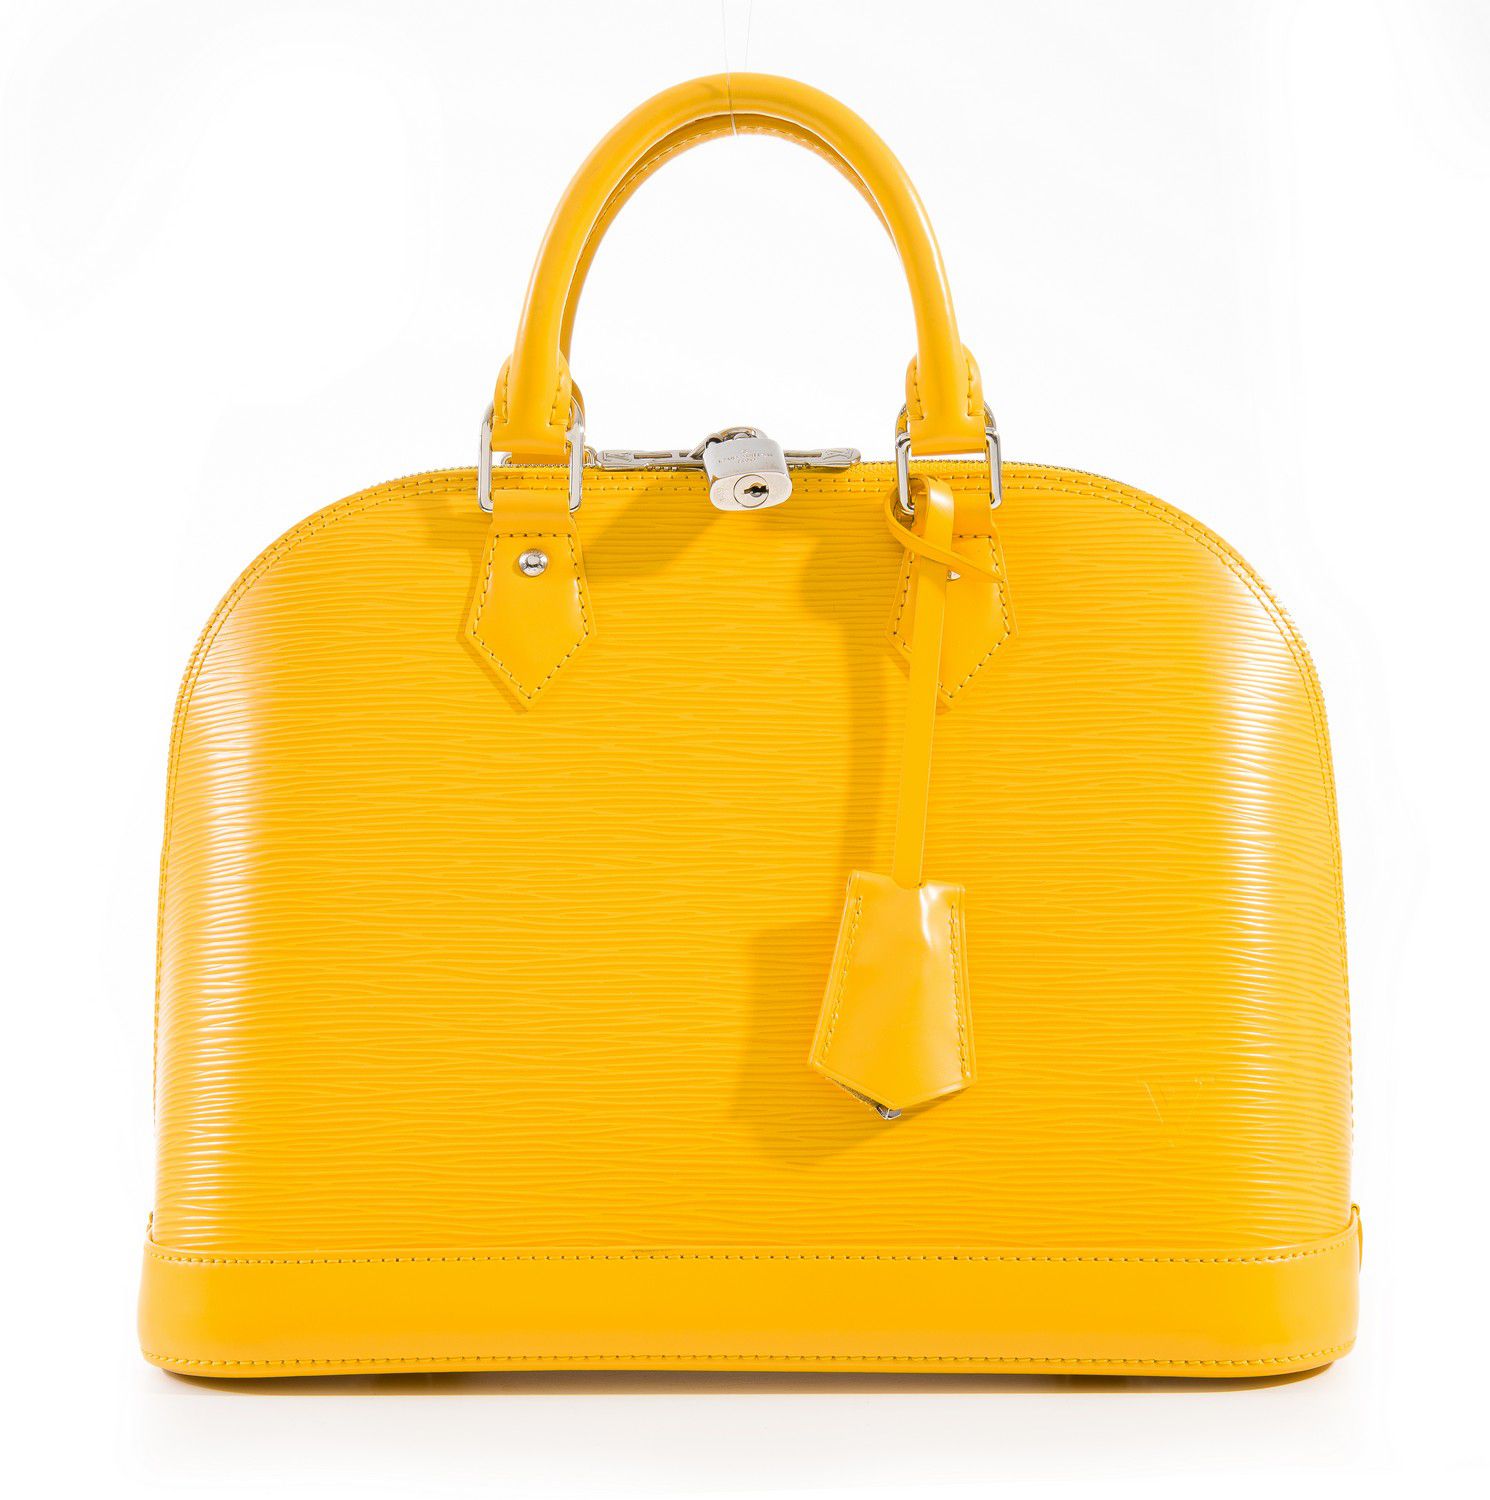 An Alma bag by Louis Vuitton, styled in yellow Epi leather with… - Handbags & Purses - Costume ...